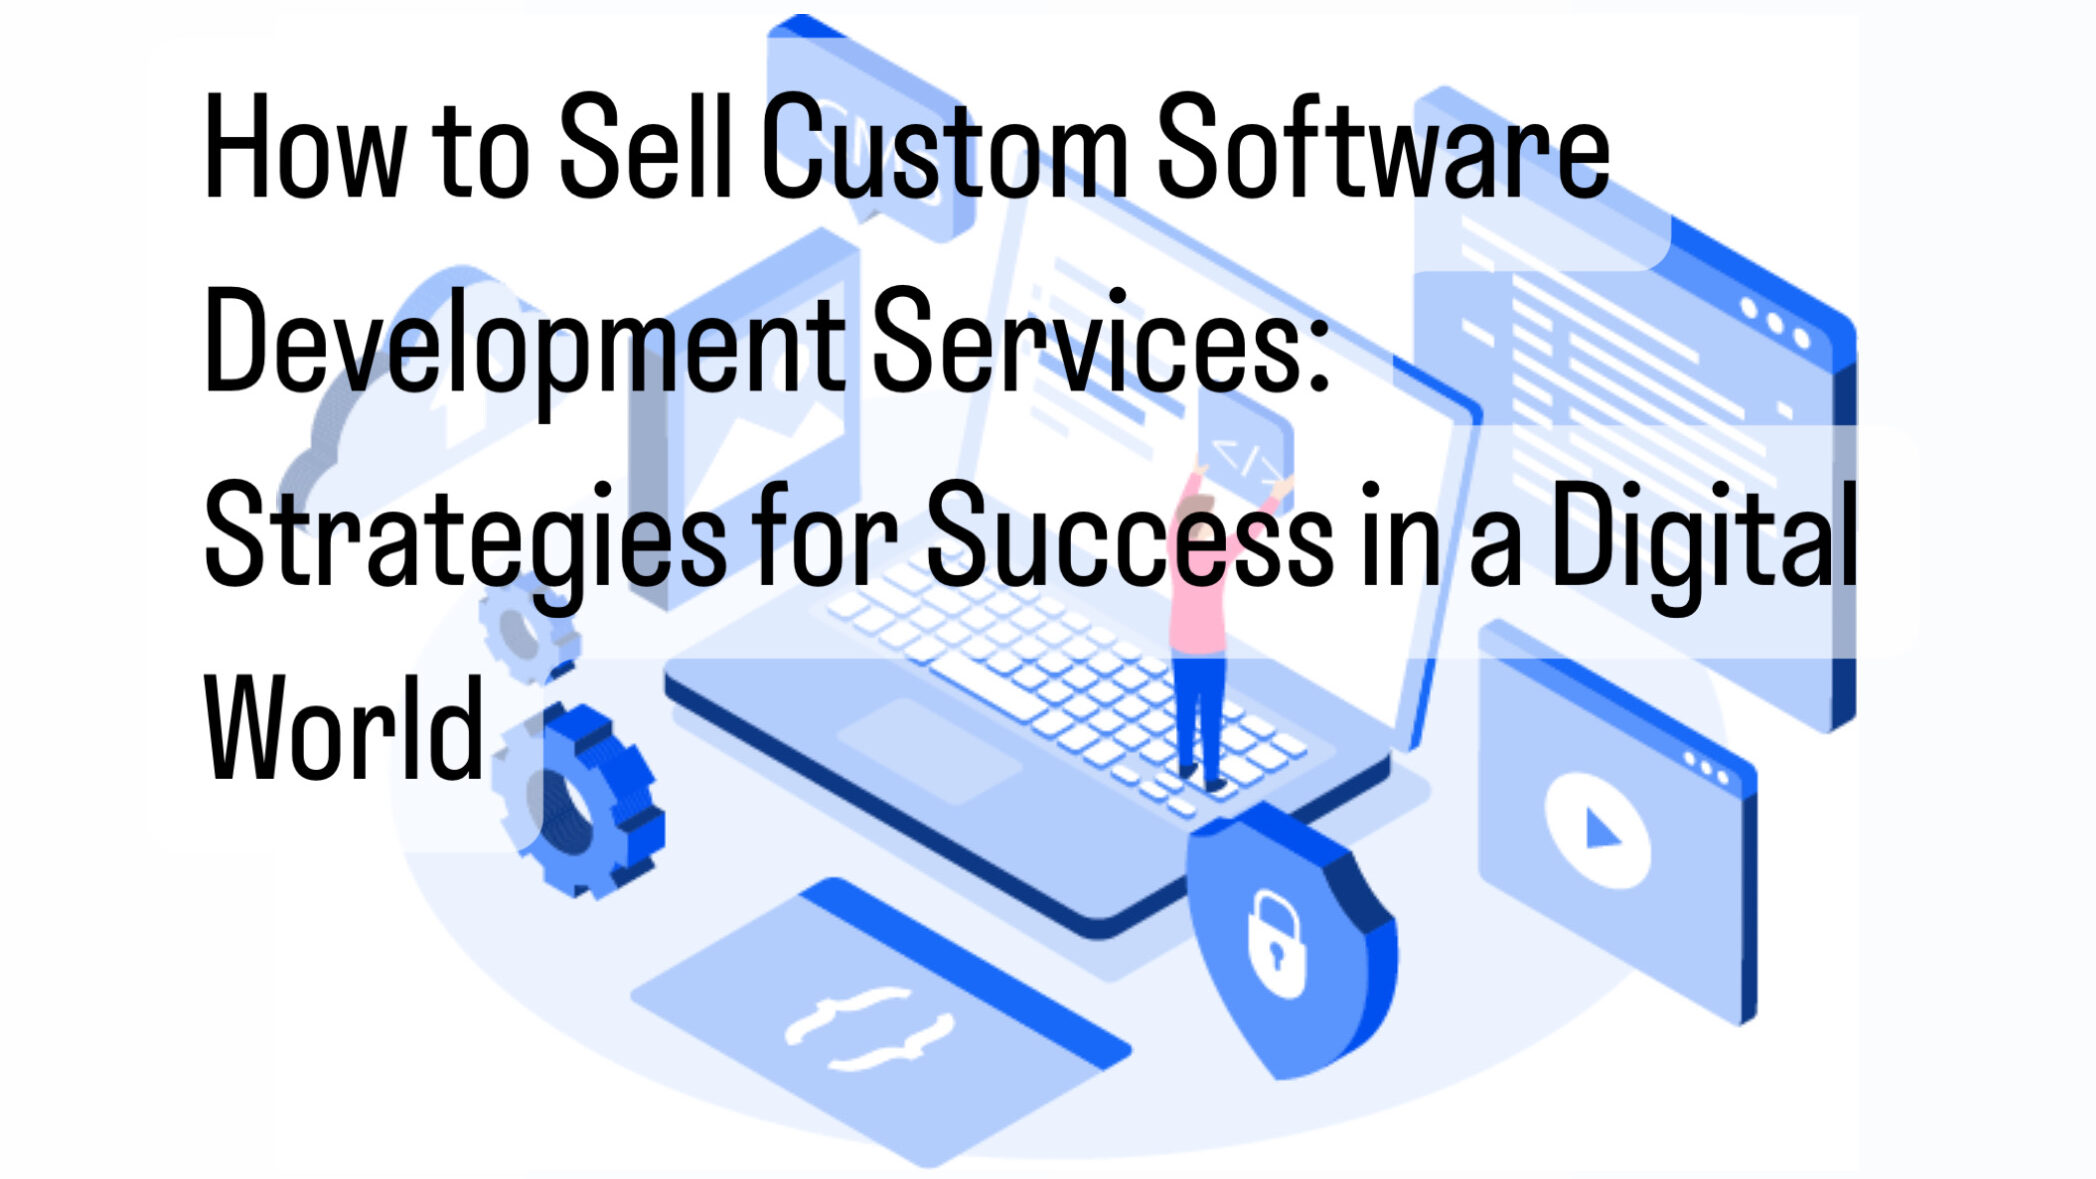 How to Sell Custom Software Development Services: Strategies for Success in a Digital World